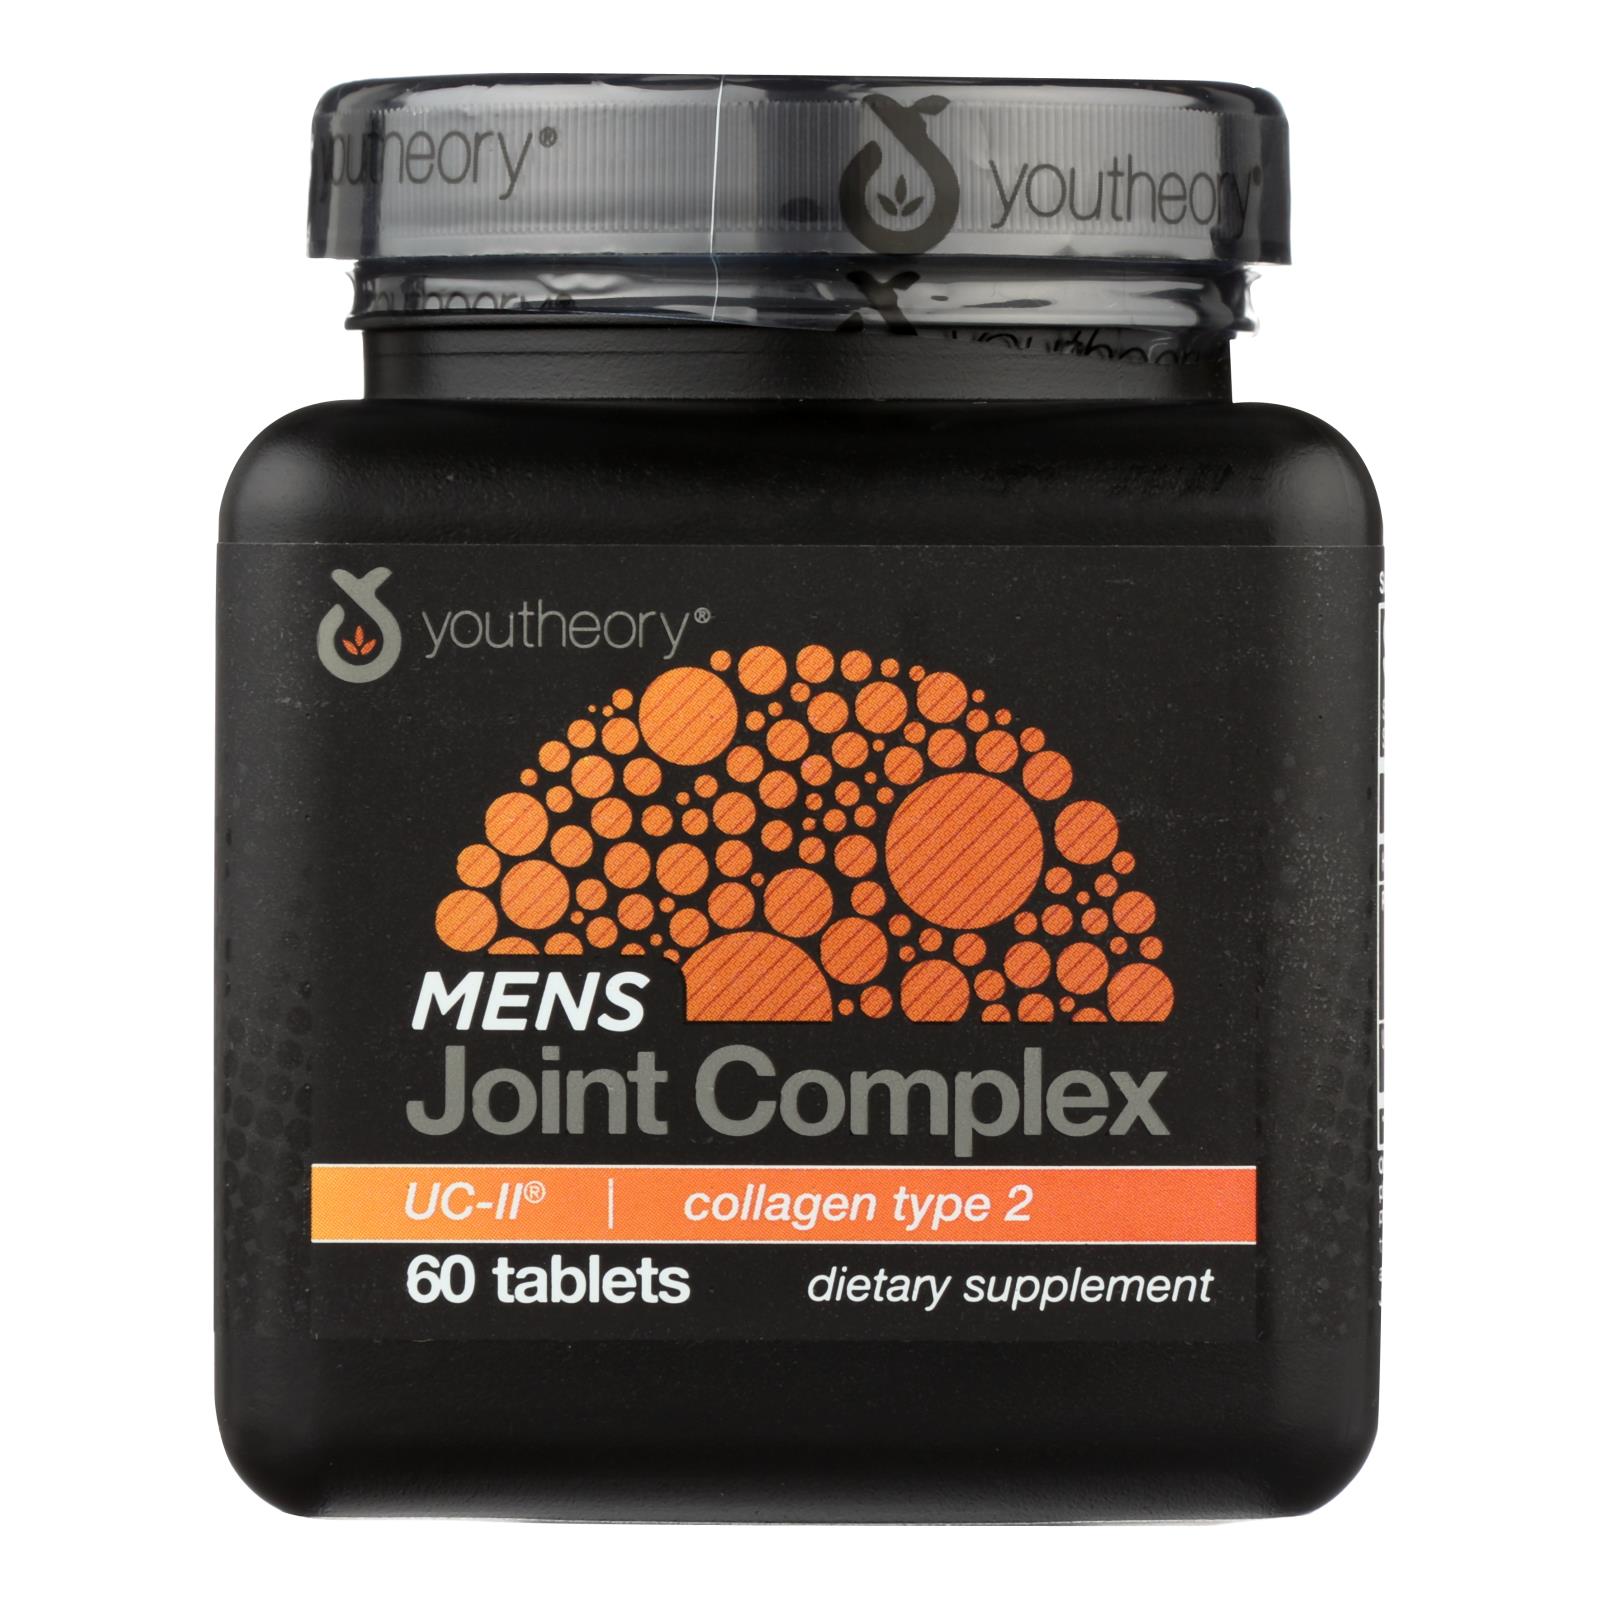 Youtheory Men's Joint Complex - 1 Each - 60 CT